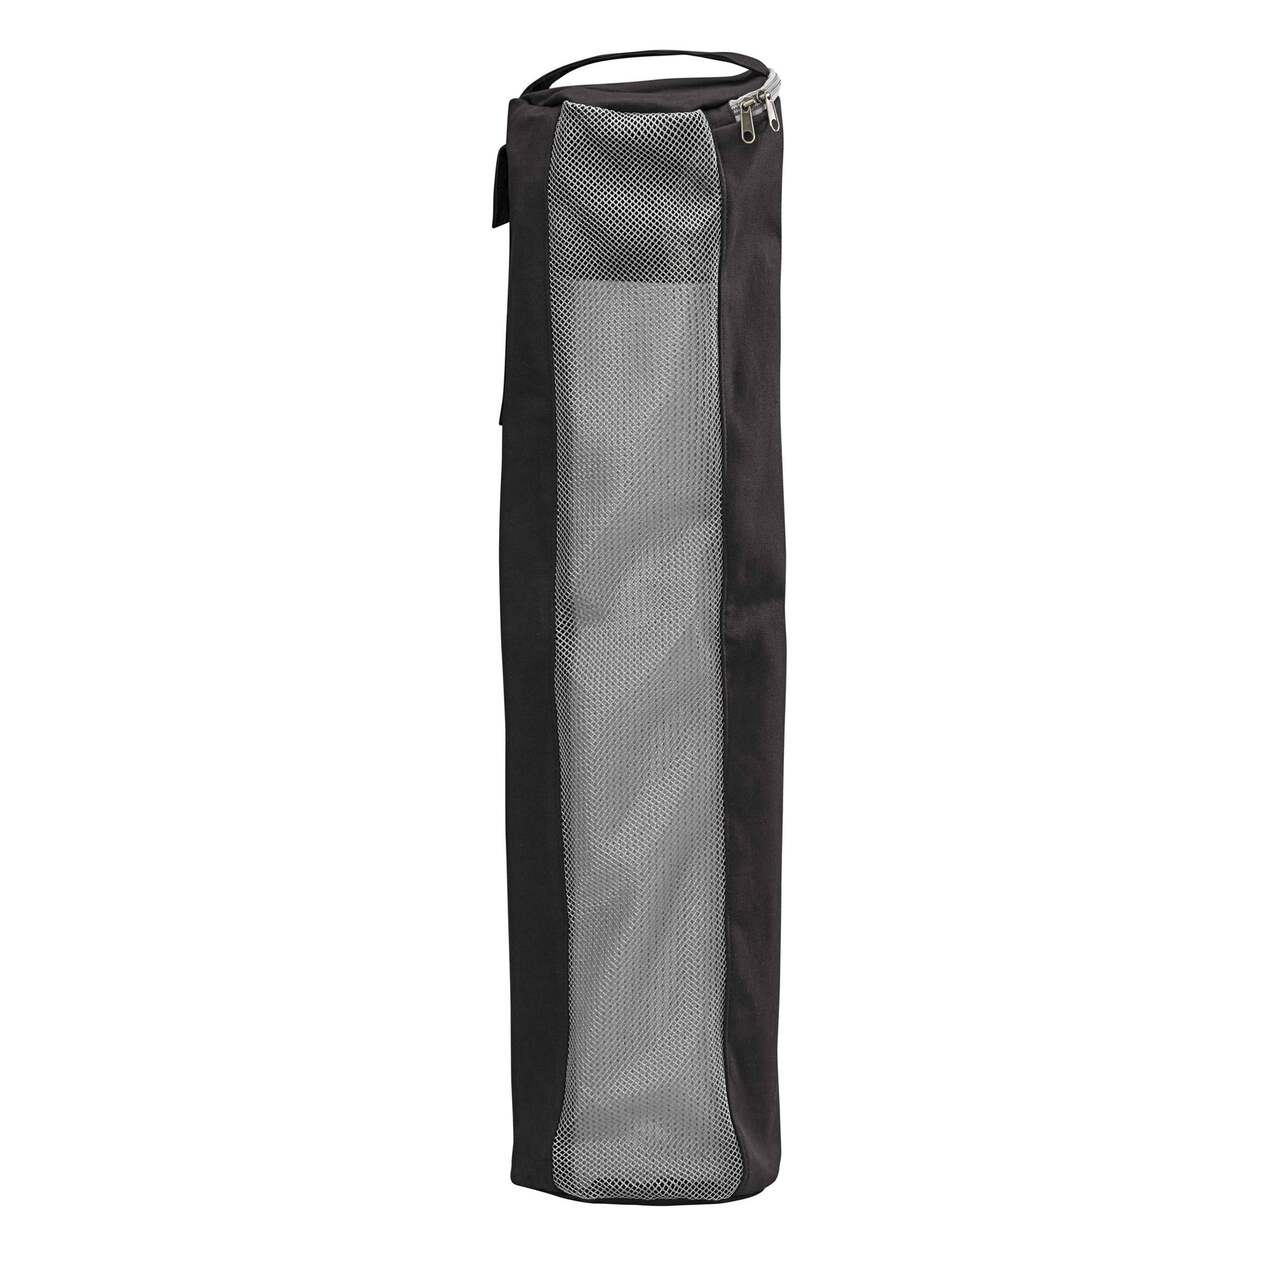 https://media-www.canadiantire.ca/product/playing/exercise/exercise-accessories/0847180/gaiam-breathable-yoga-mat-bag-44bc2c88-700e-4205-a6fc-b8a3144aa177-jpgrendition.jpg?imdensity=1&imwidth=640&impolicy=mZoom